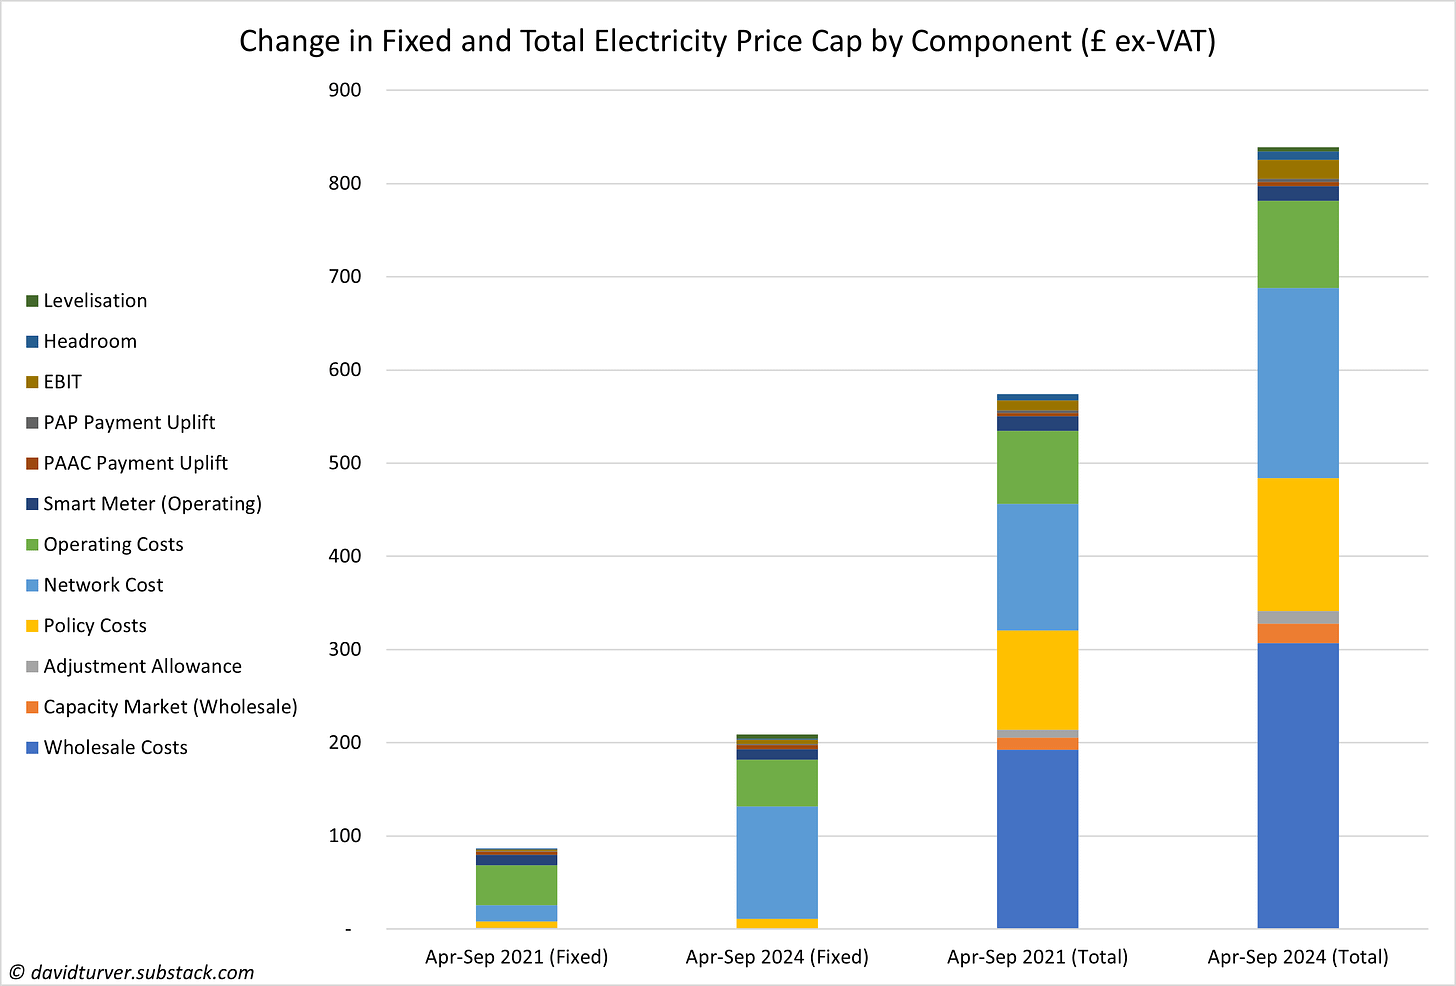 Figure 4 - Change in Fixed and Total Electricity Price Cap by Component (£ ex-VAT)